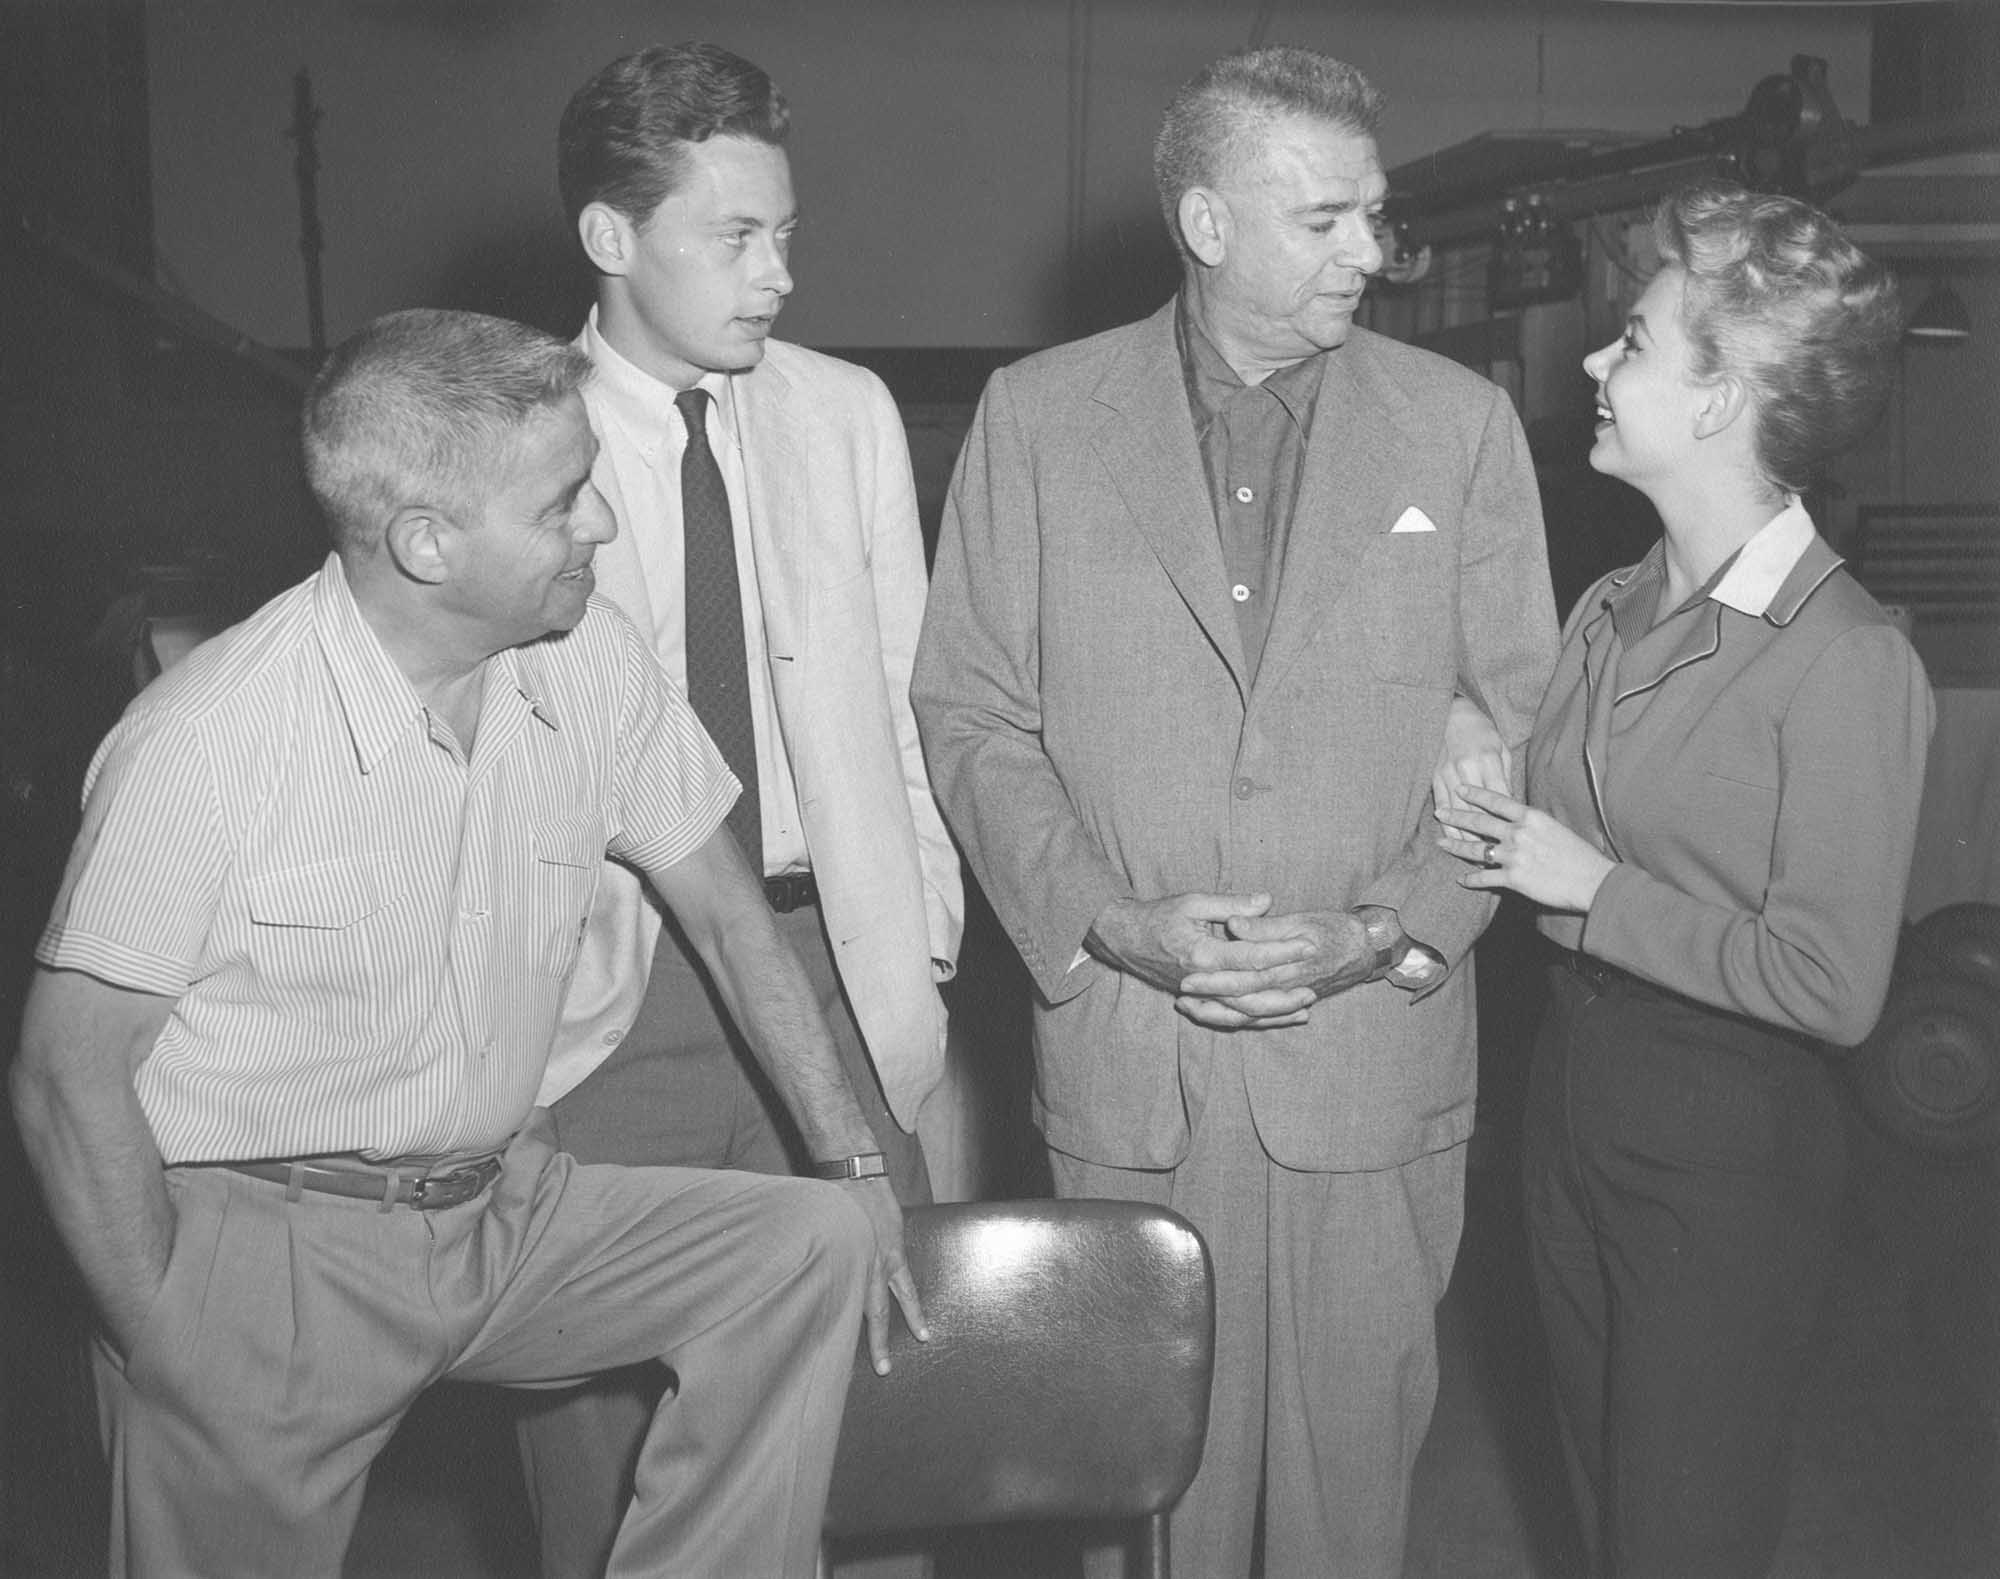 A recording session photo from the 1958 film version of South Pacific.